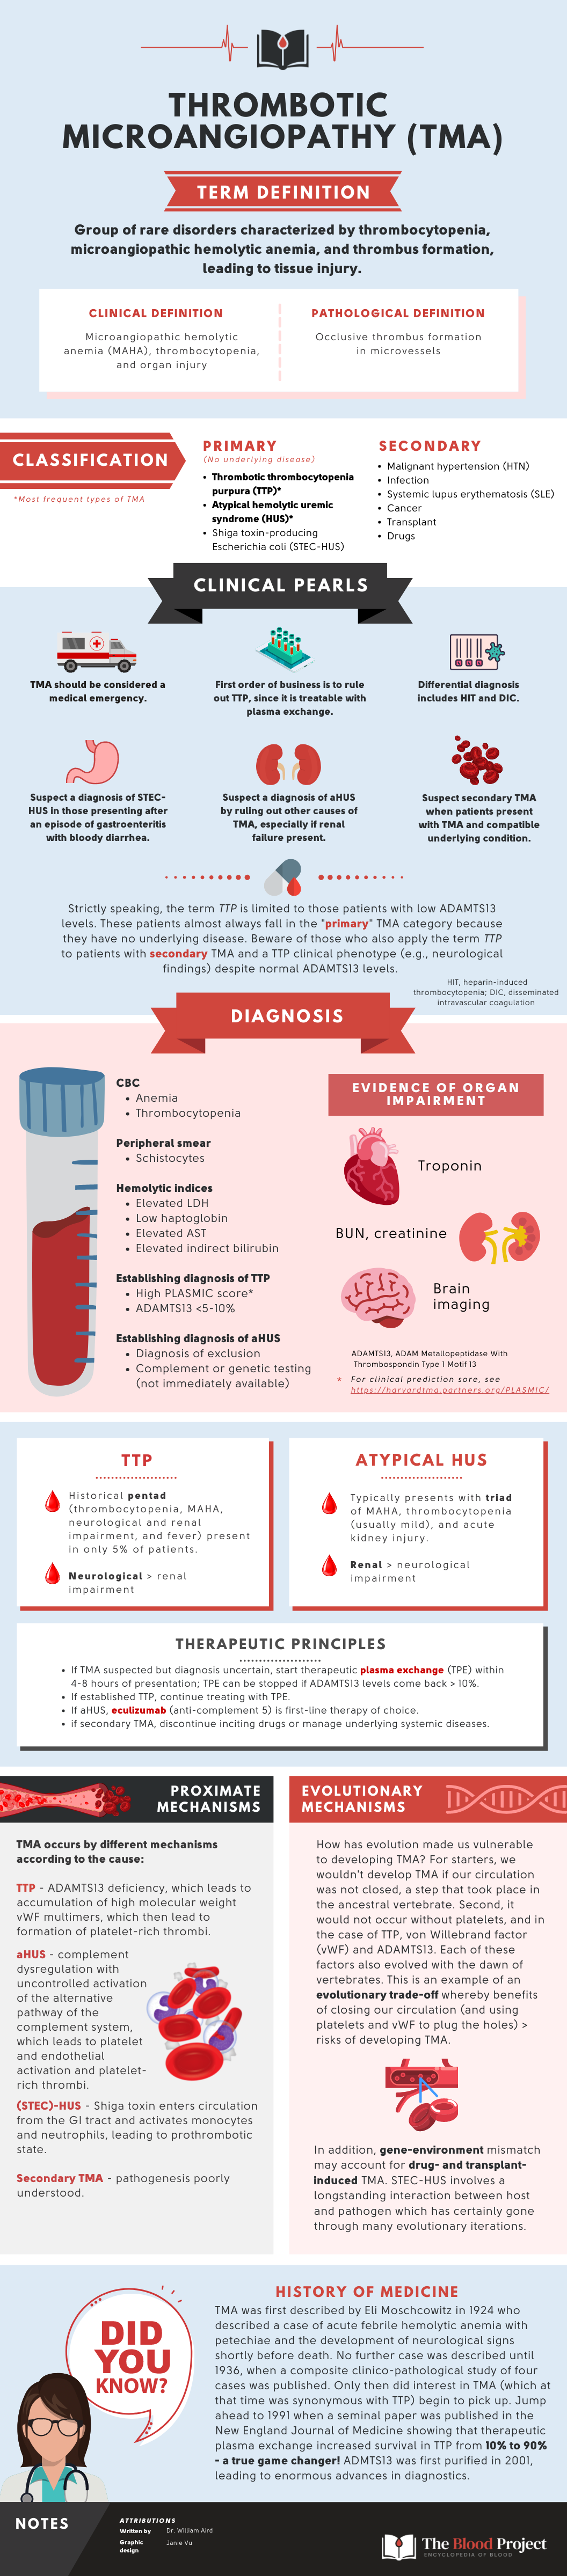 Thrombotic Microangiopathy • The Blood Project